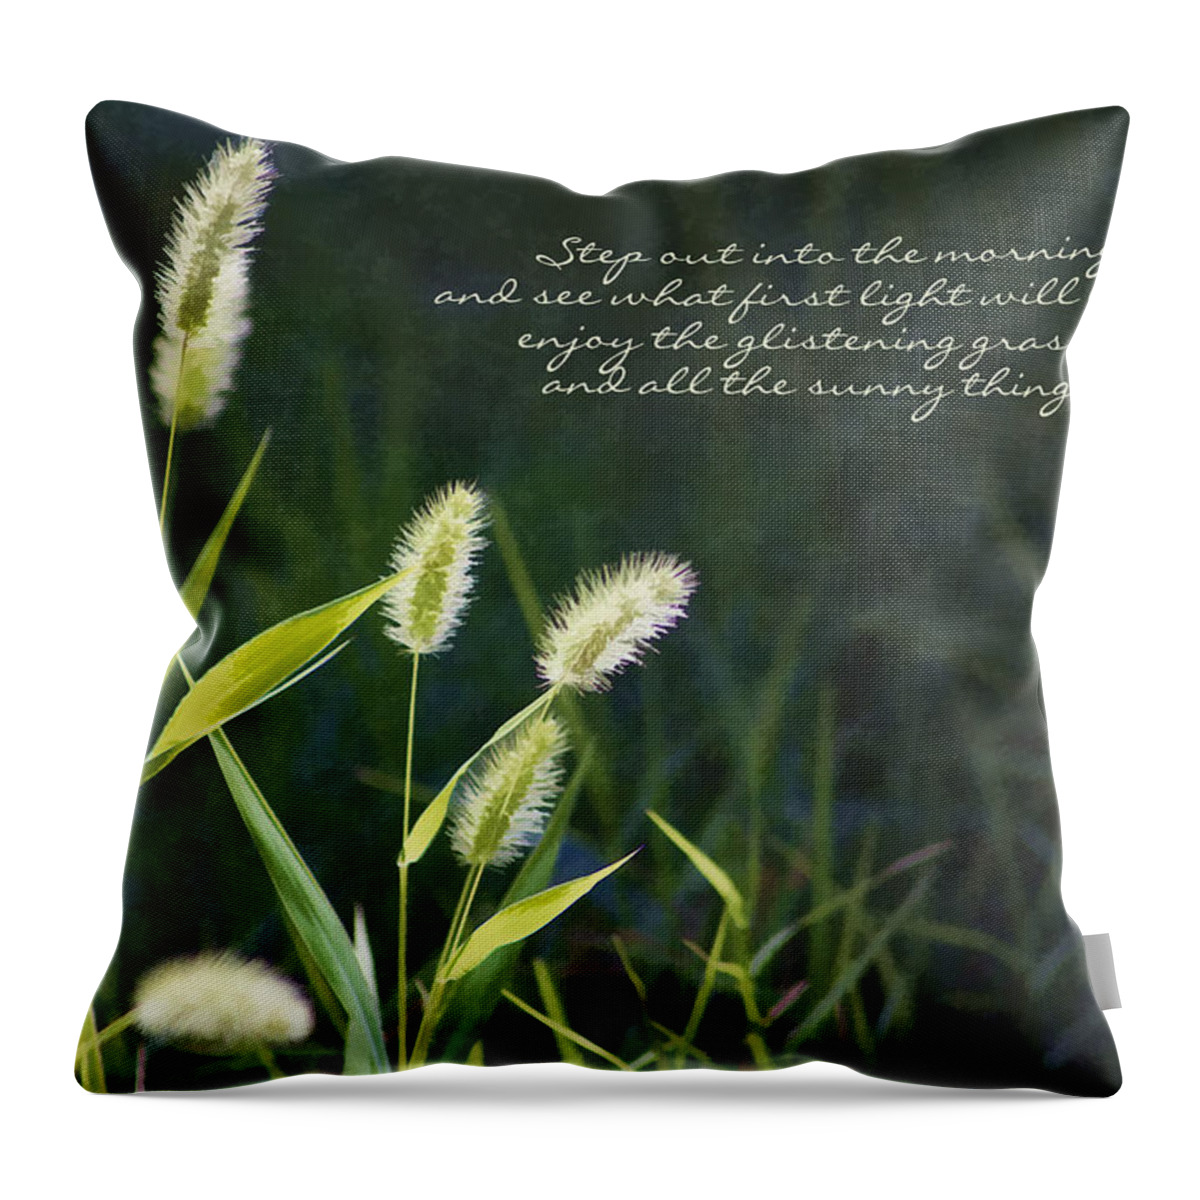 Morning Throw Pillow featuring the photograph Mornings First Light Poem by Kathy Clark by Kathy Clark